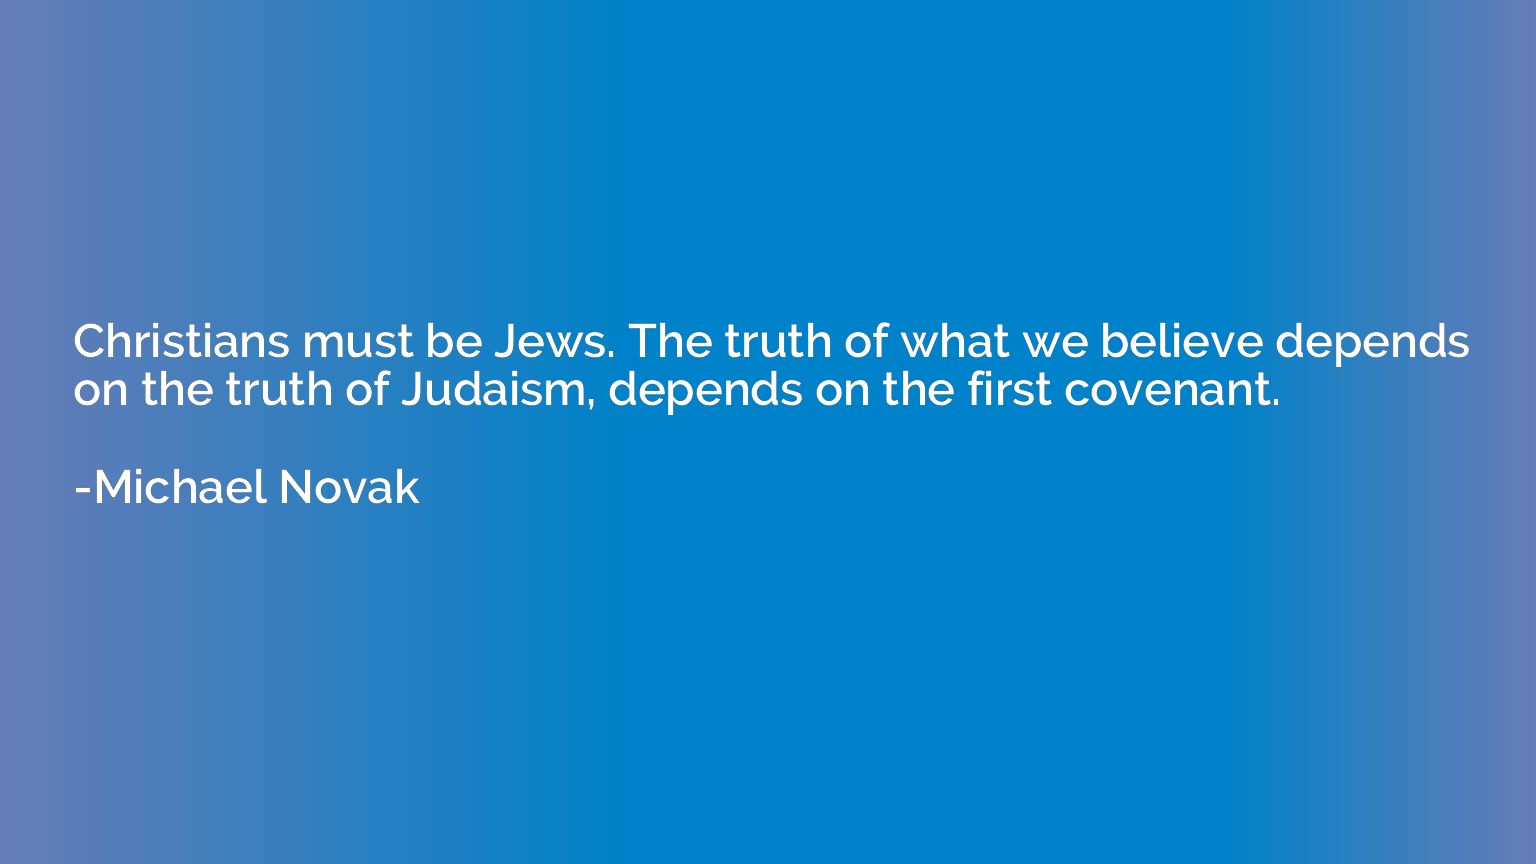 Christians must be Jews. The truth of what we believe depend